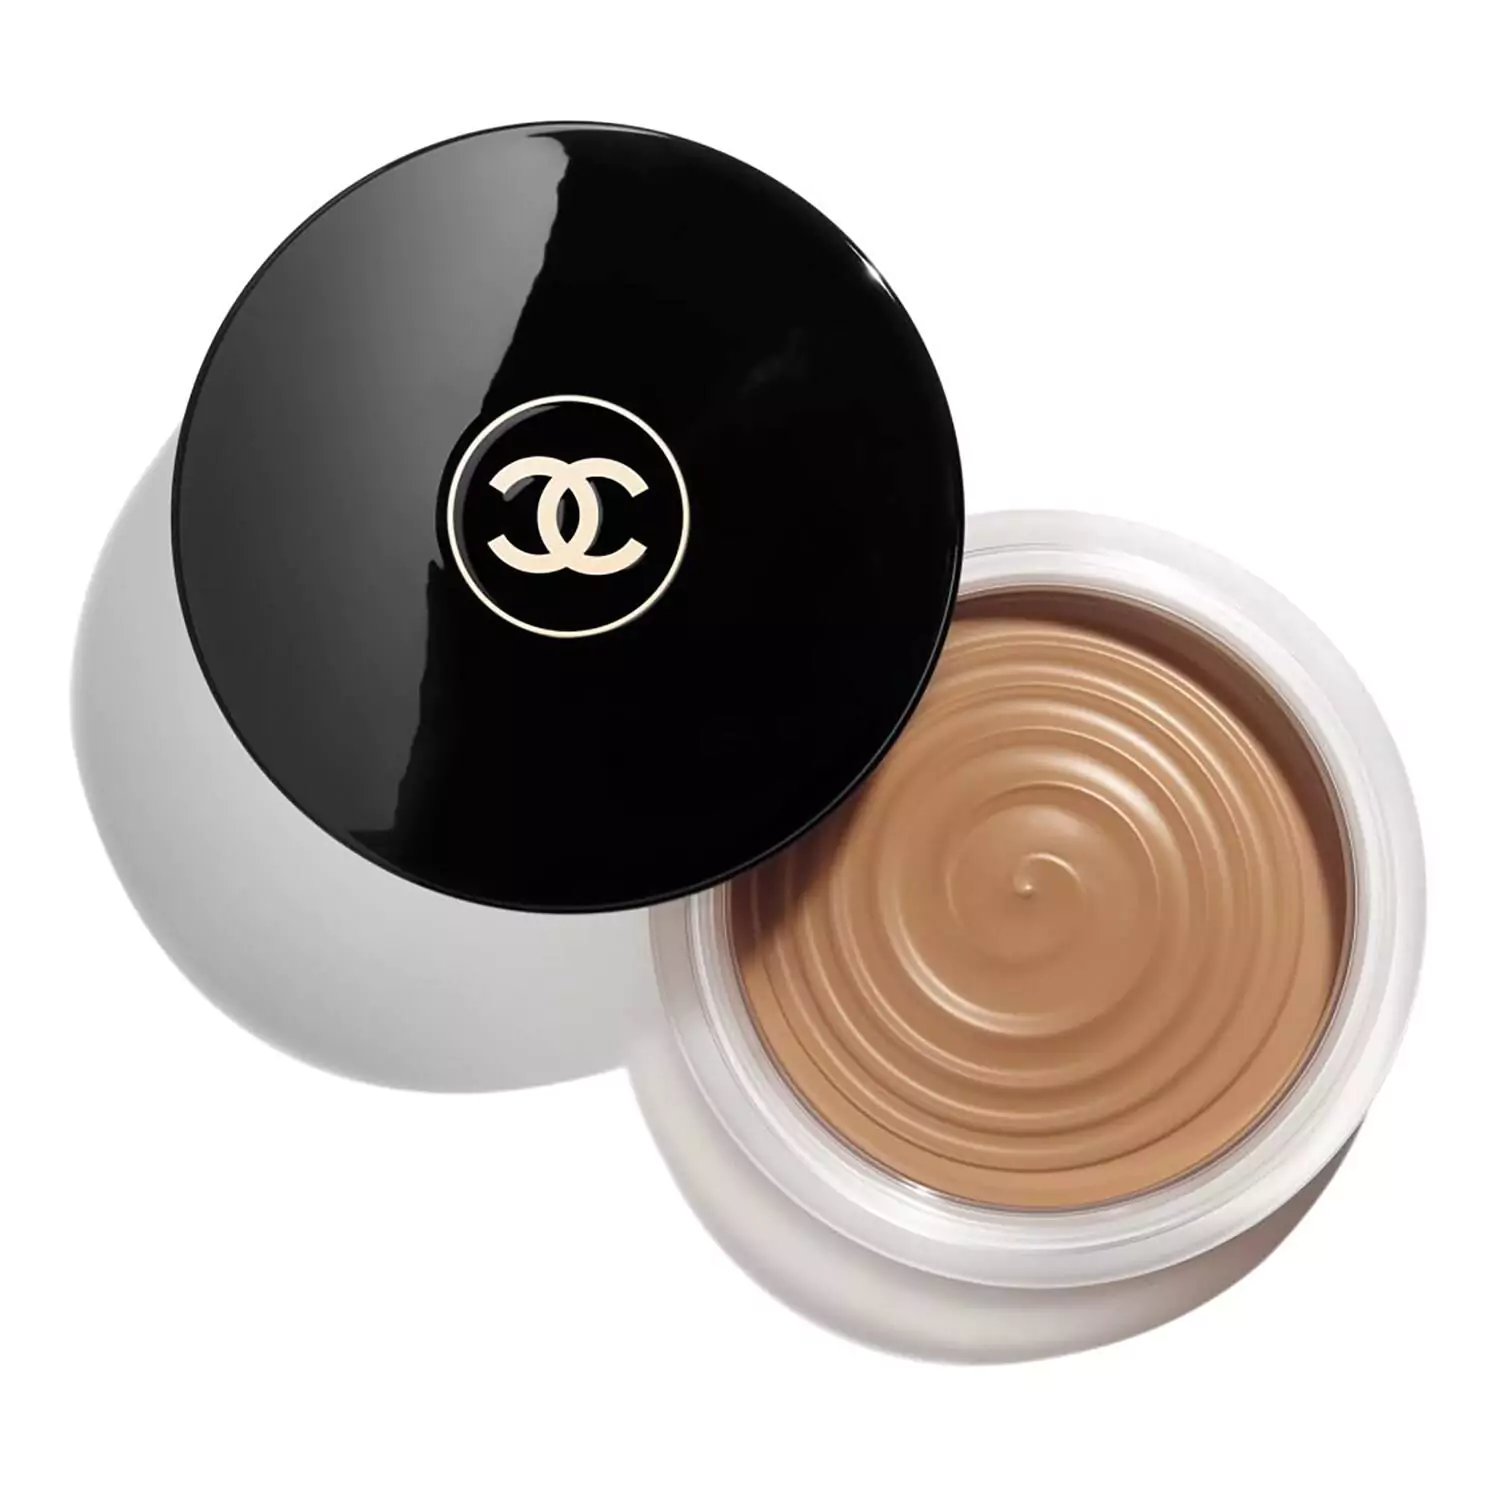 Chanel Les Beiges Bronzing Cream Discounts and Cashback